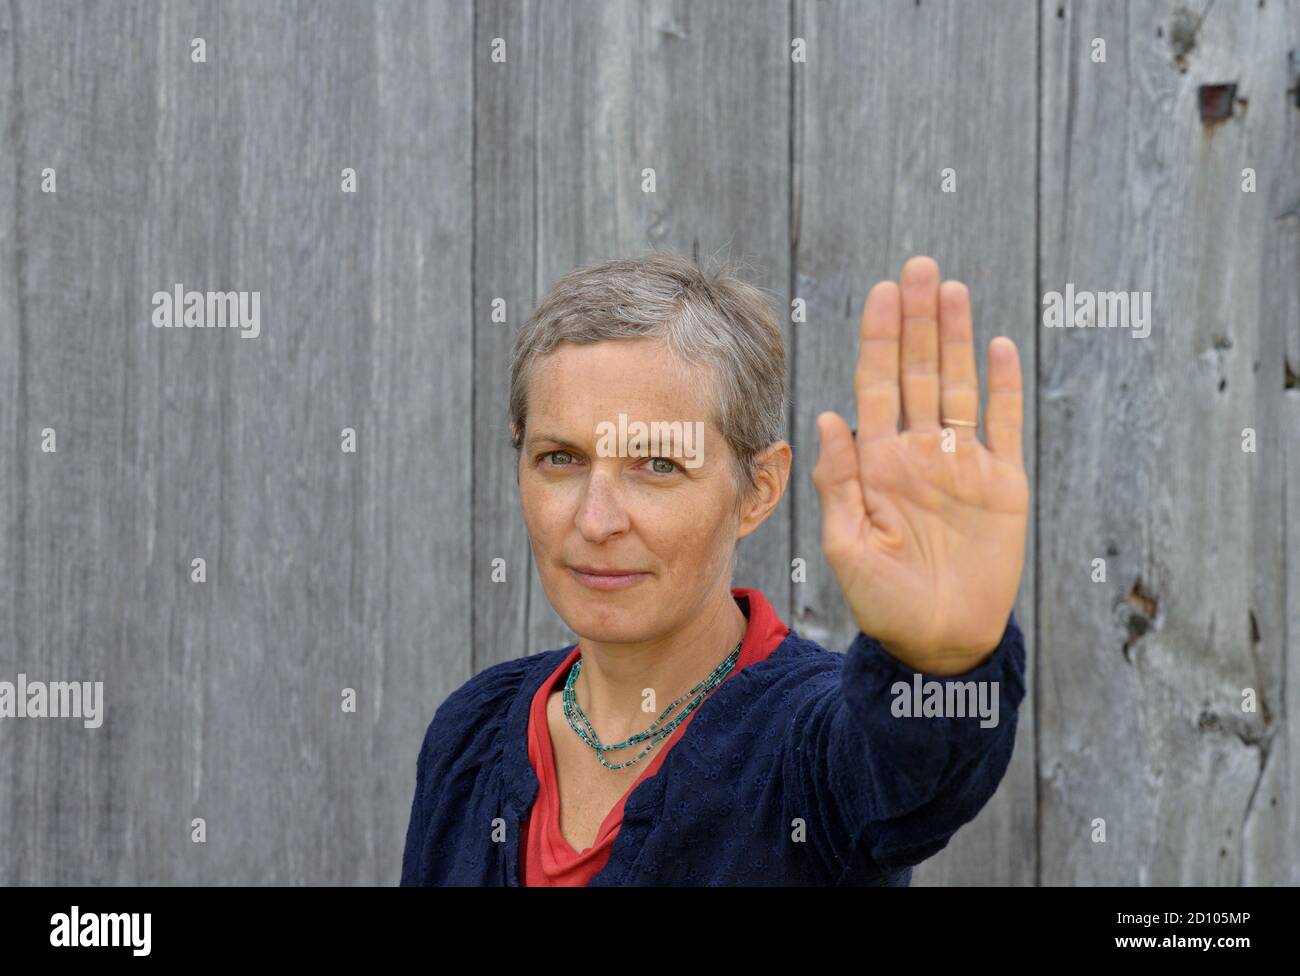 Serious middle-aged Caucasian country woman makes the hand palm stop sign with her left hand (stop gesture), in front of old barn wood background. Stock Photo